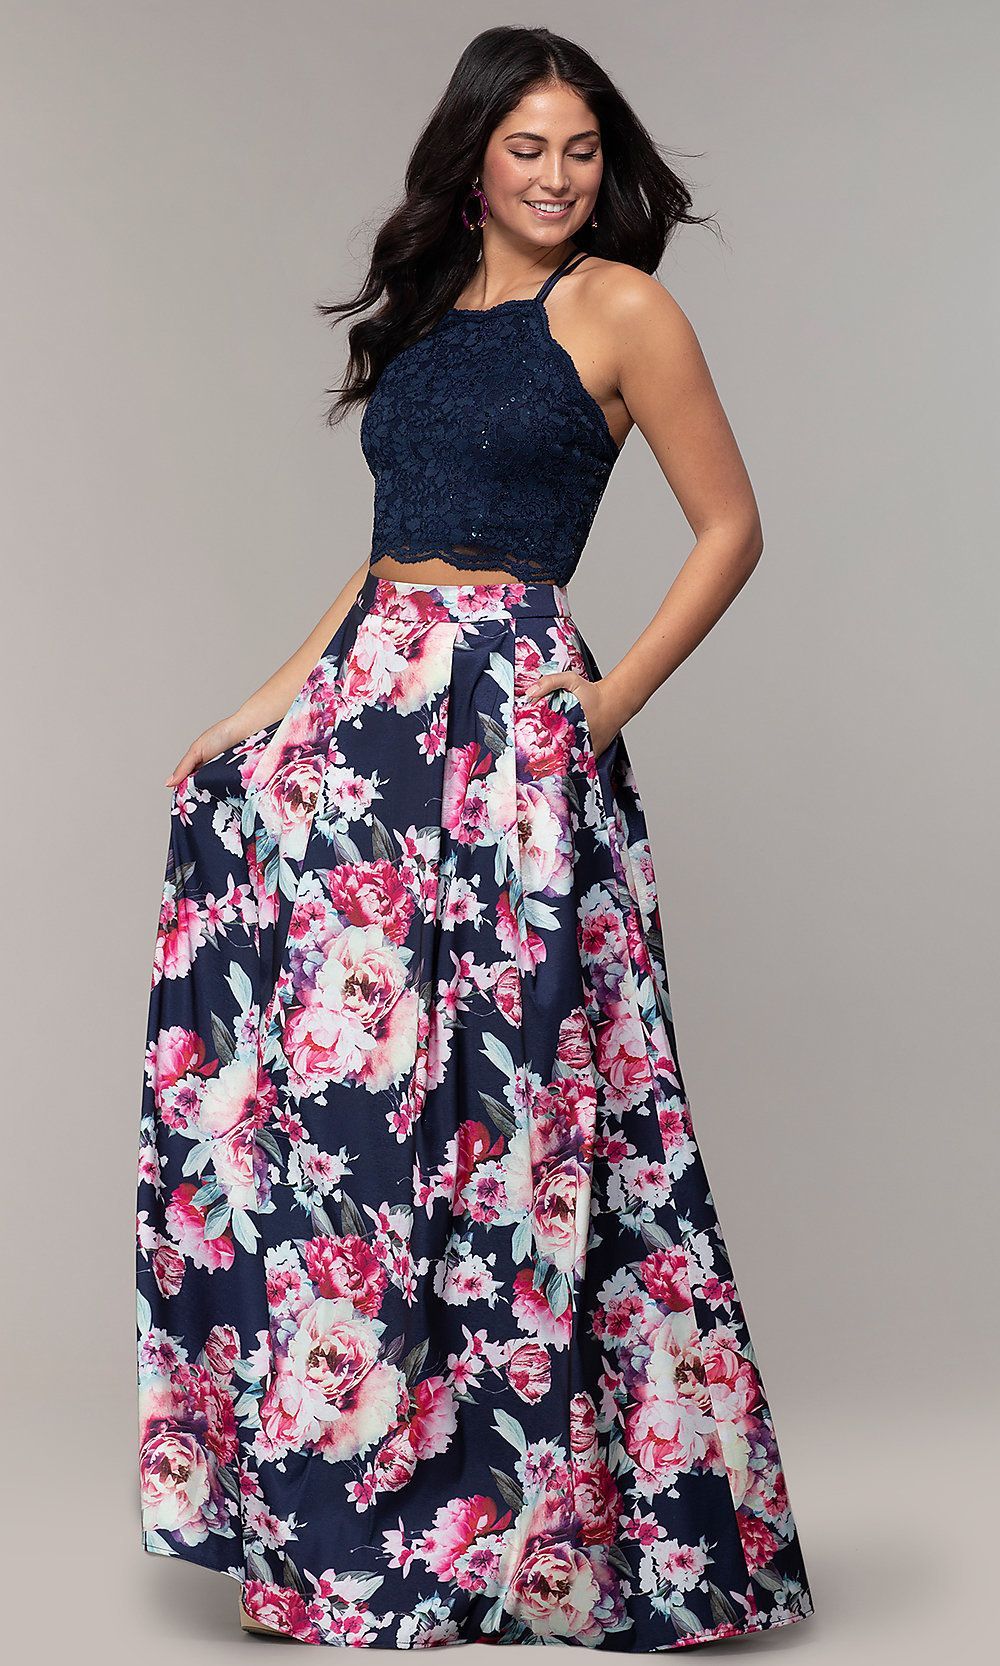 Two-Piece Long Floral-Print Prom Dress by PromGirl -   15 dress Floral elegant ideas